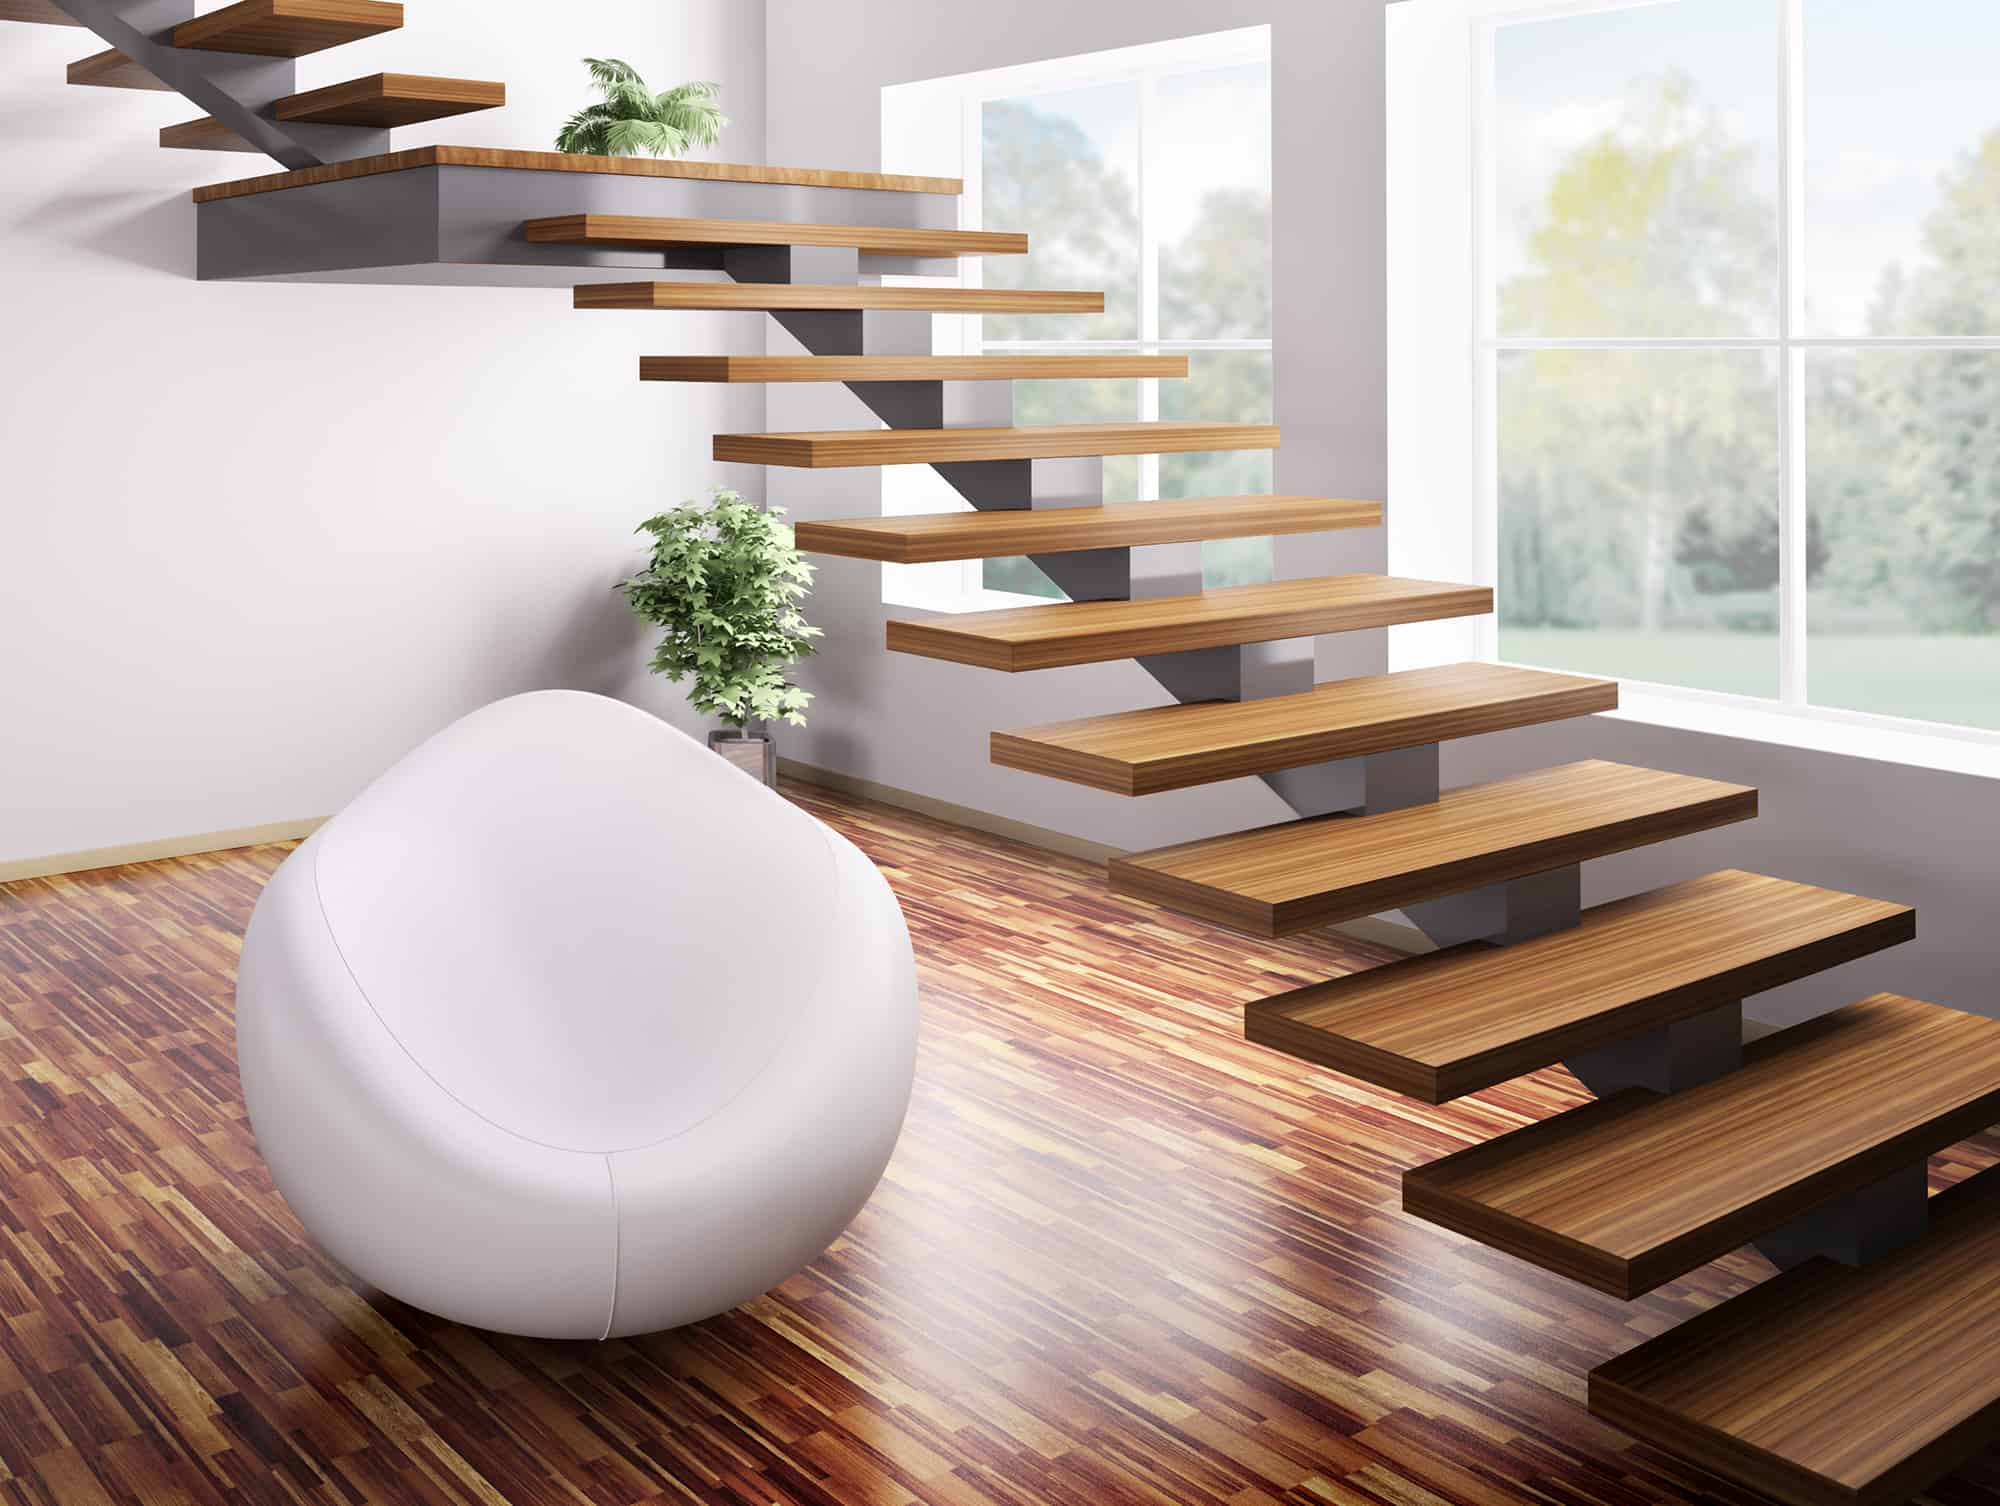 3D Render of Interior Staircase in living space